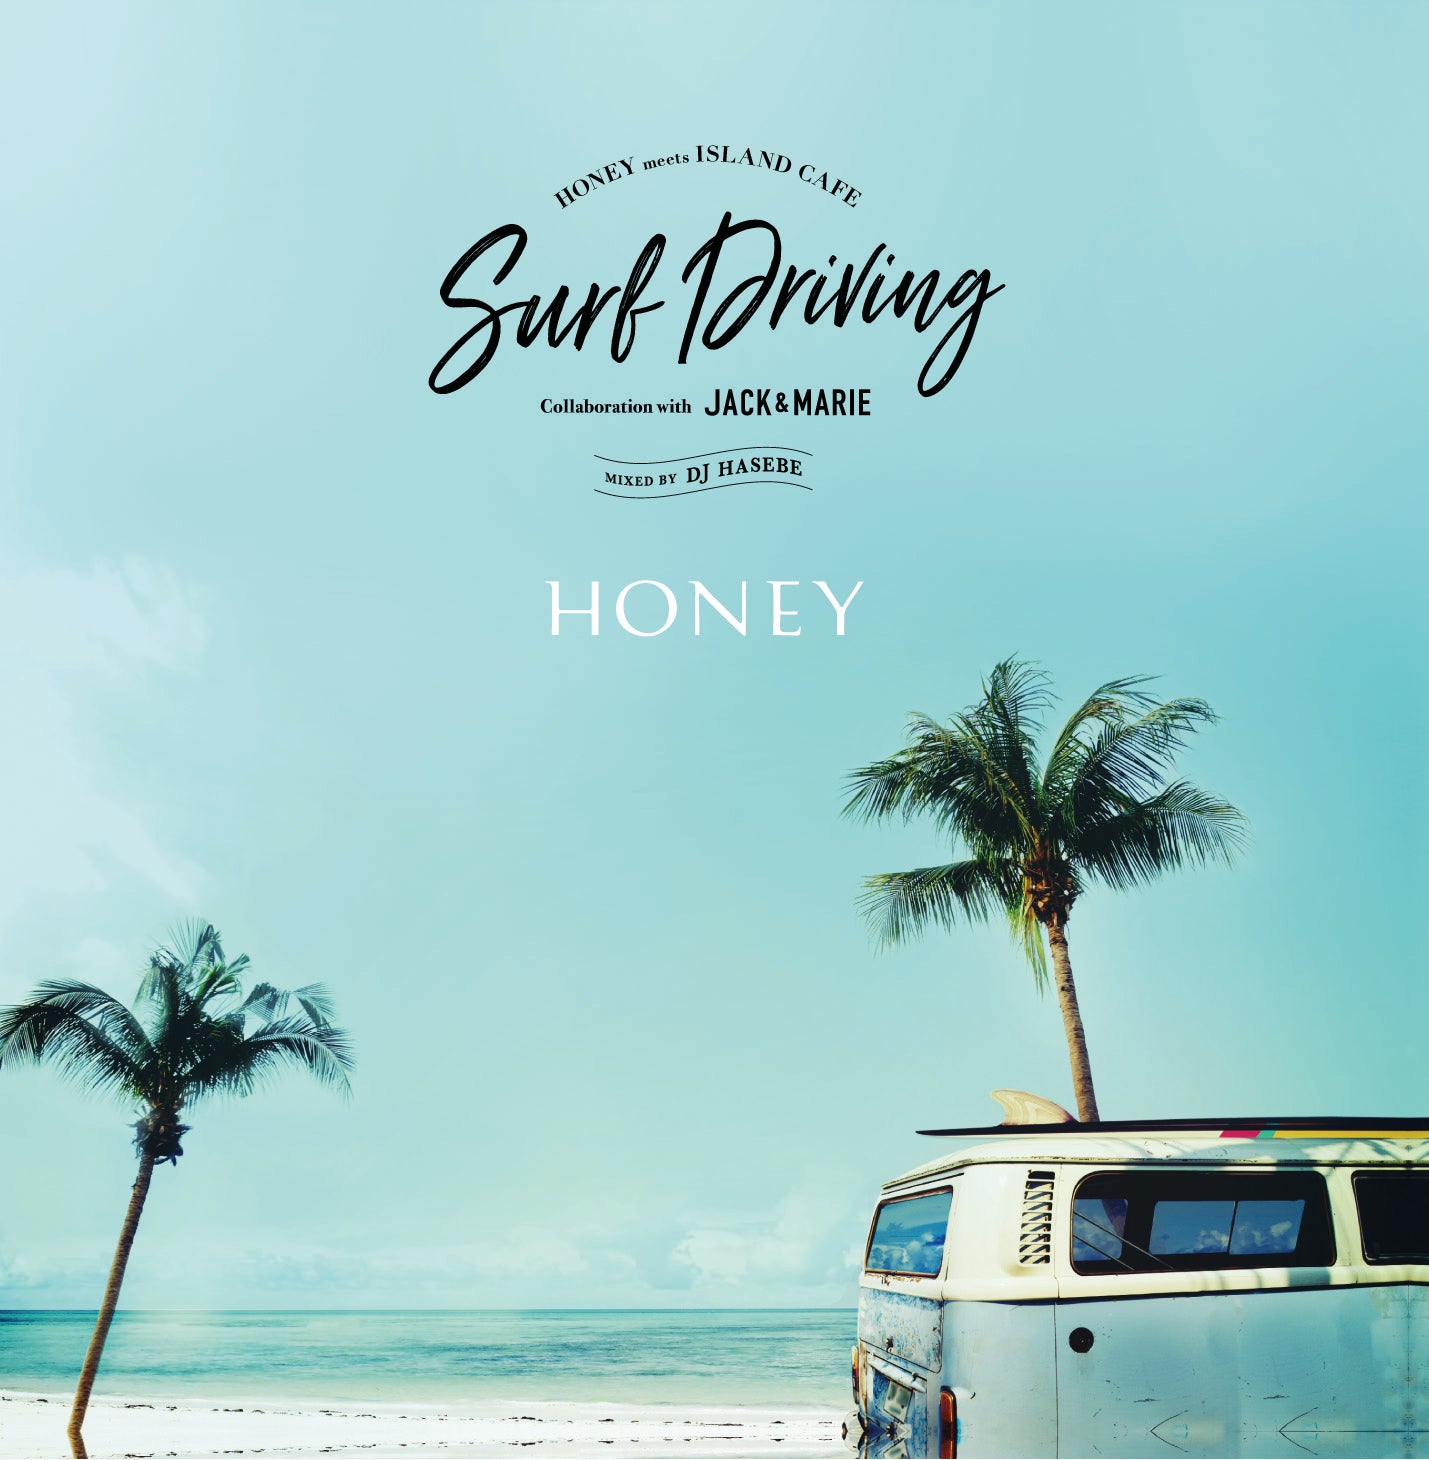 HONEY meets ISLAND CAFE -SURF DRIVING- Collaboration with JACK & MARIE